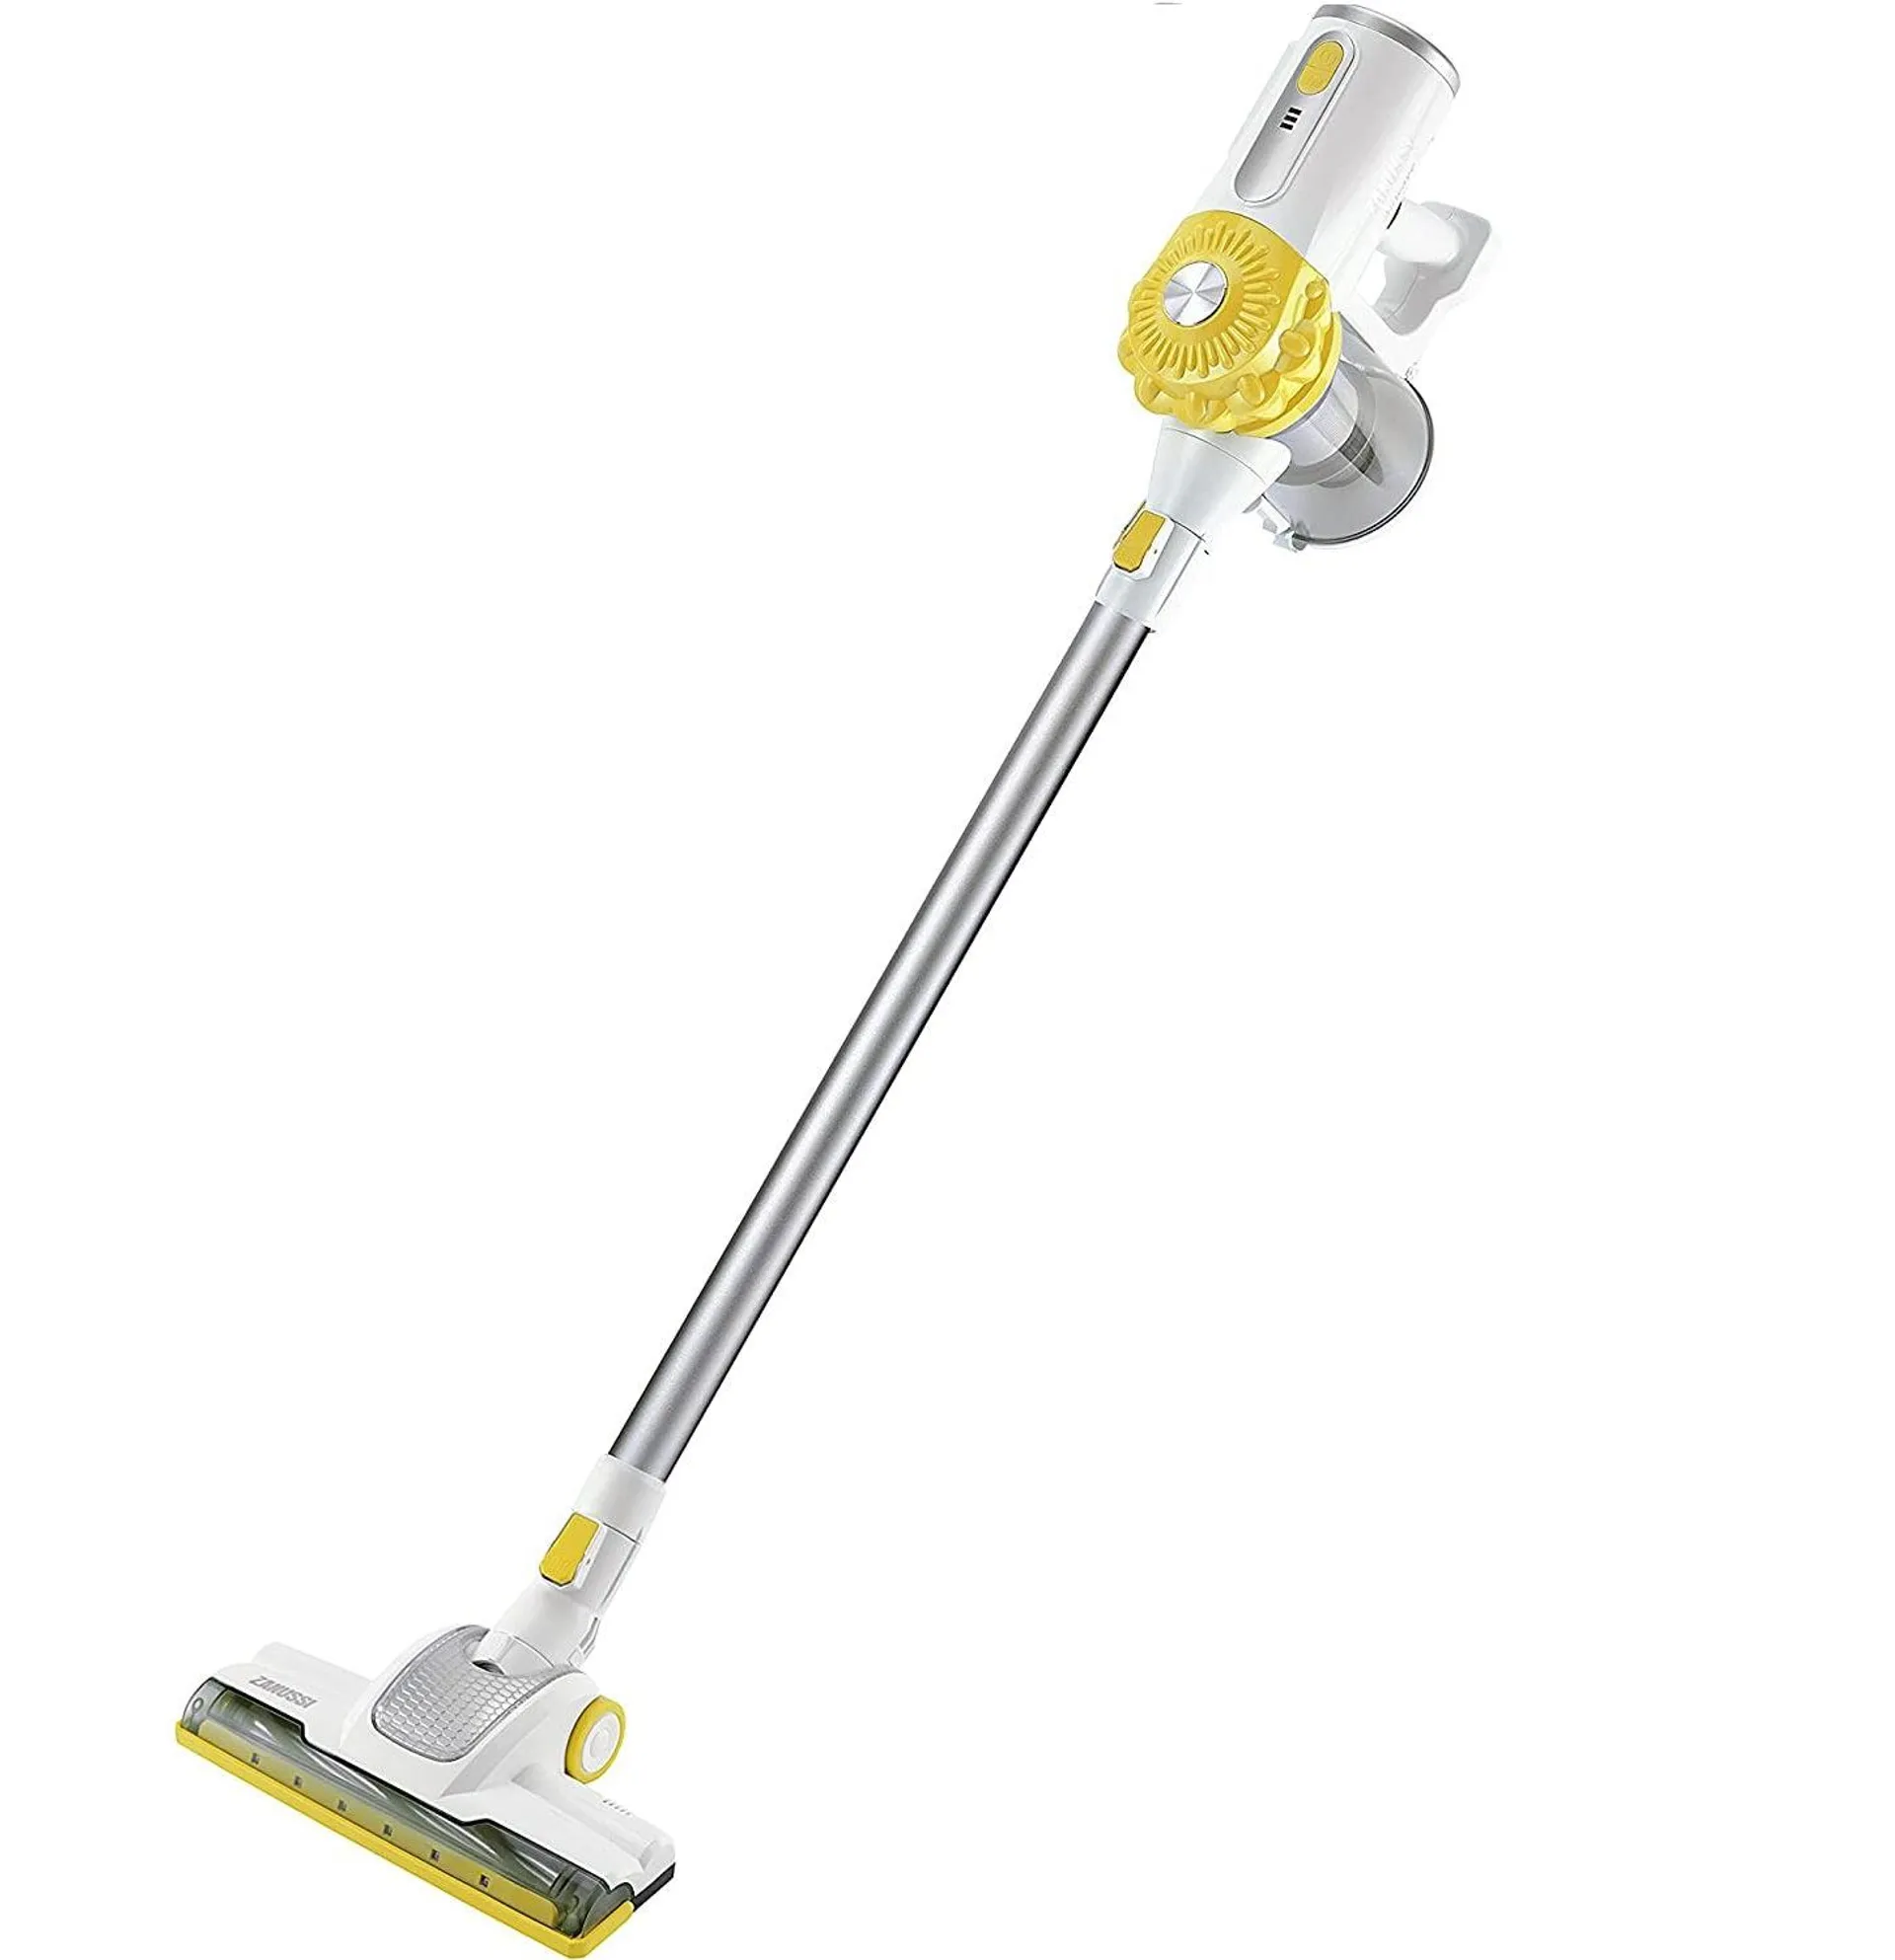 Zanussi Cordless 3 in 1 Rechargeable Hand Stick Vacuum Cleaner Yellow ZHS-32802-YL